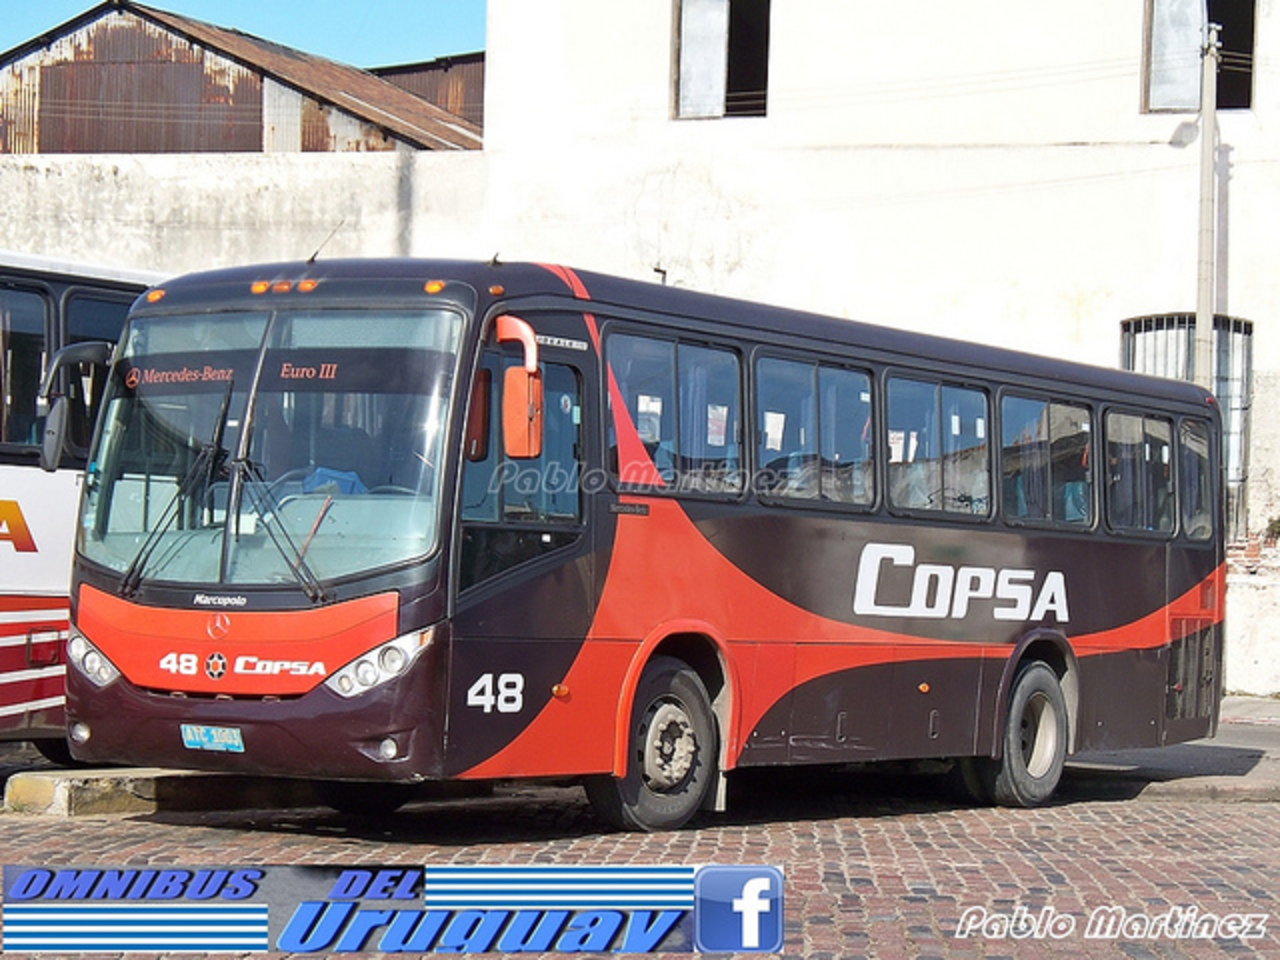 Marcopolo Ideale, COPSA. | Flickr - Photo Sharing!